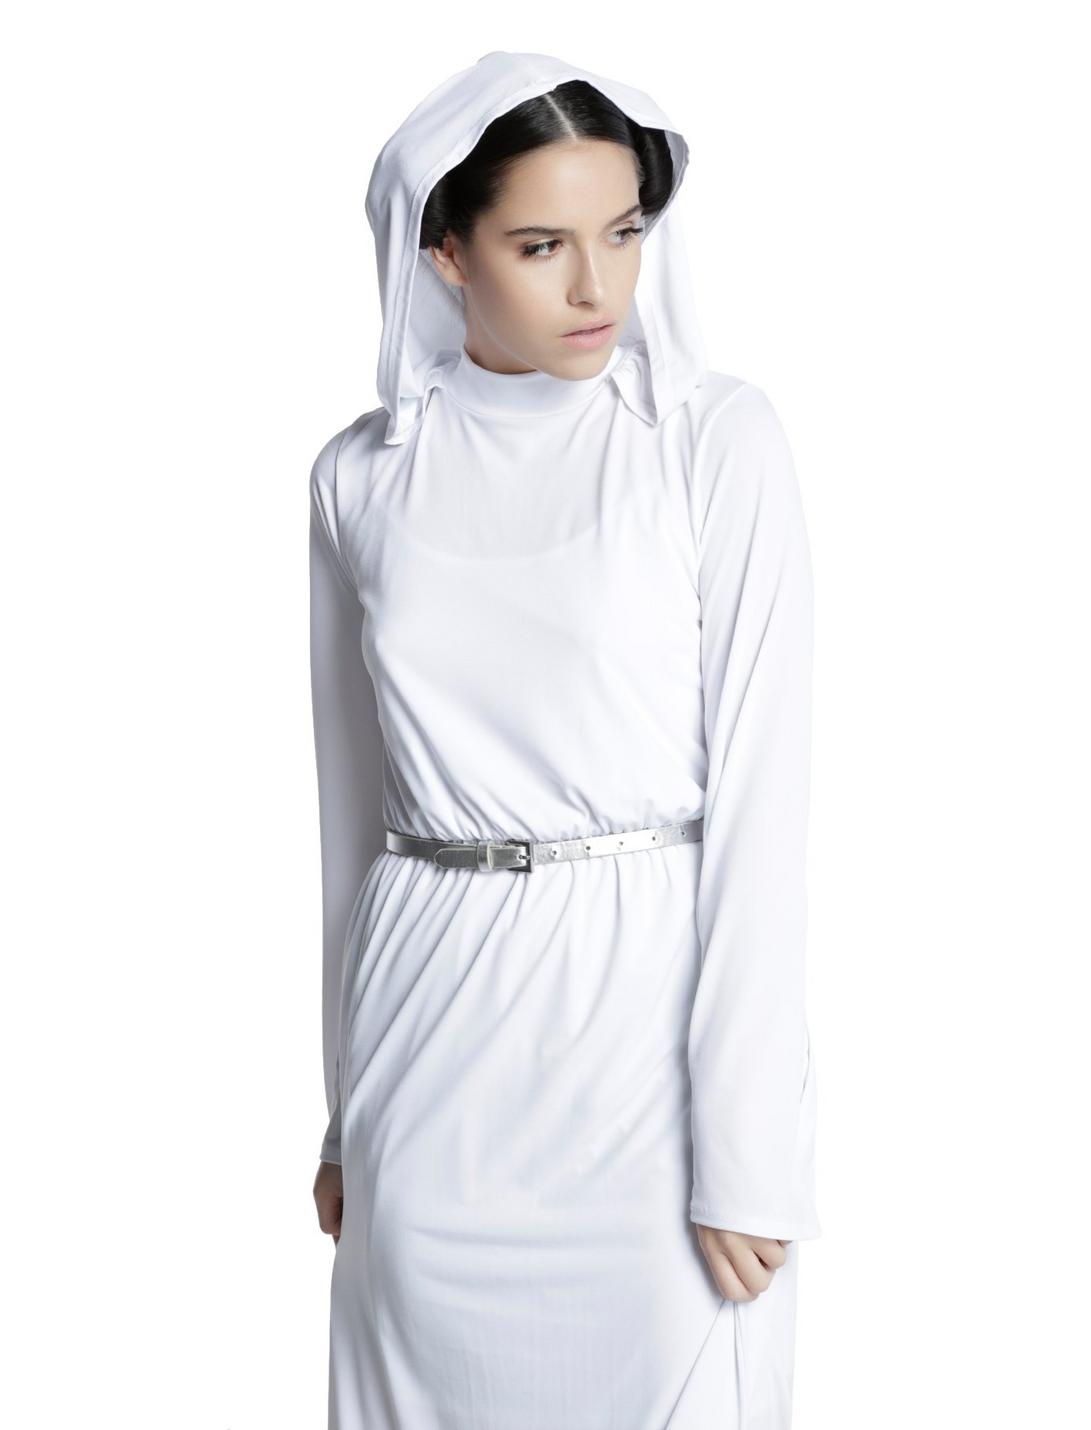 Her Universe Star Wars Princess Leia White Cosplay Gown, WHITE, hi-res